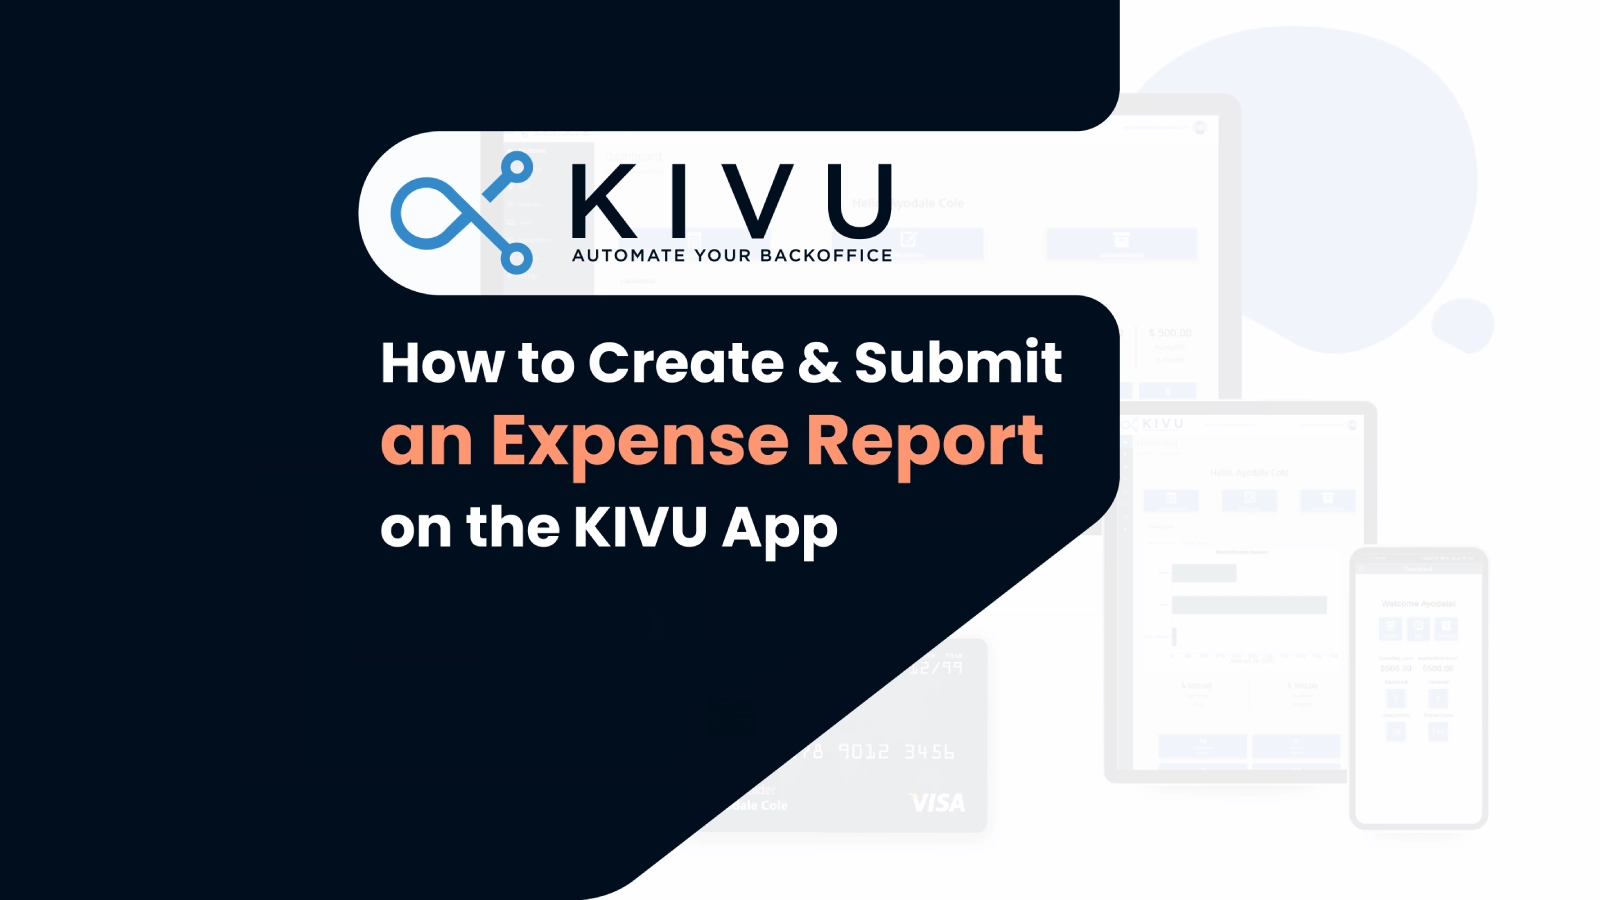 How to Create and Submit an Expense Report in KIVU App